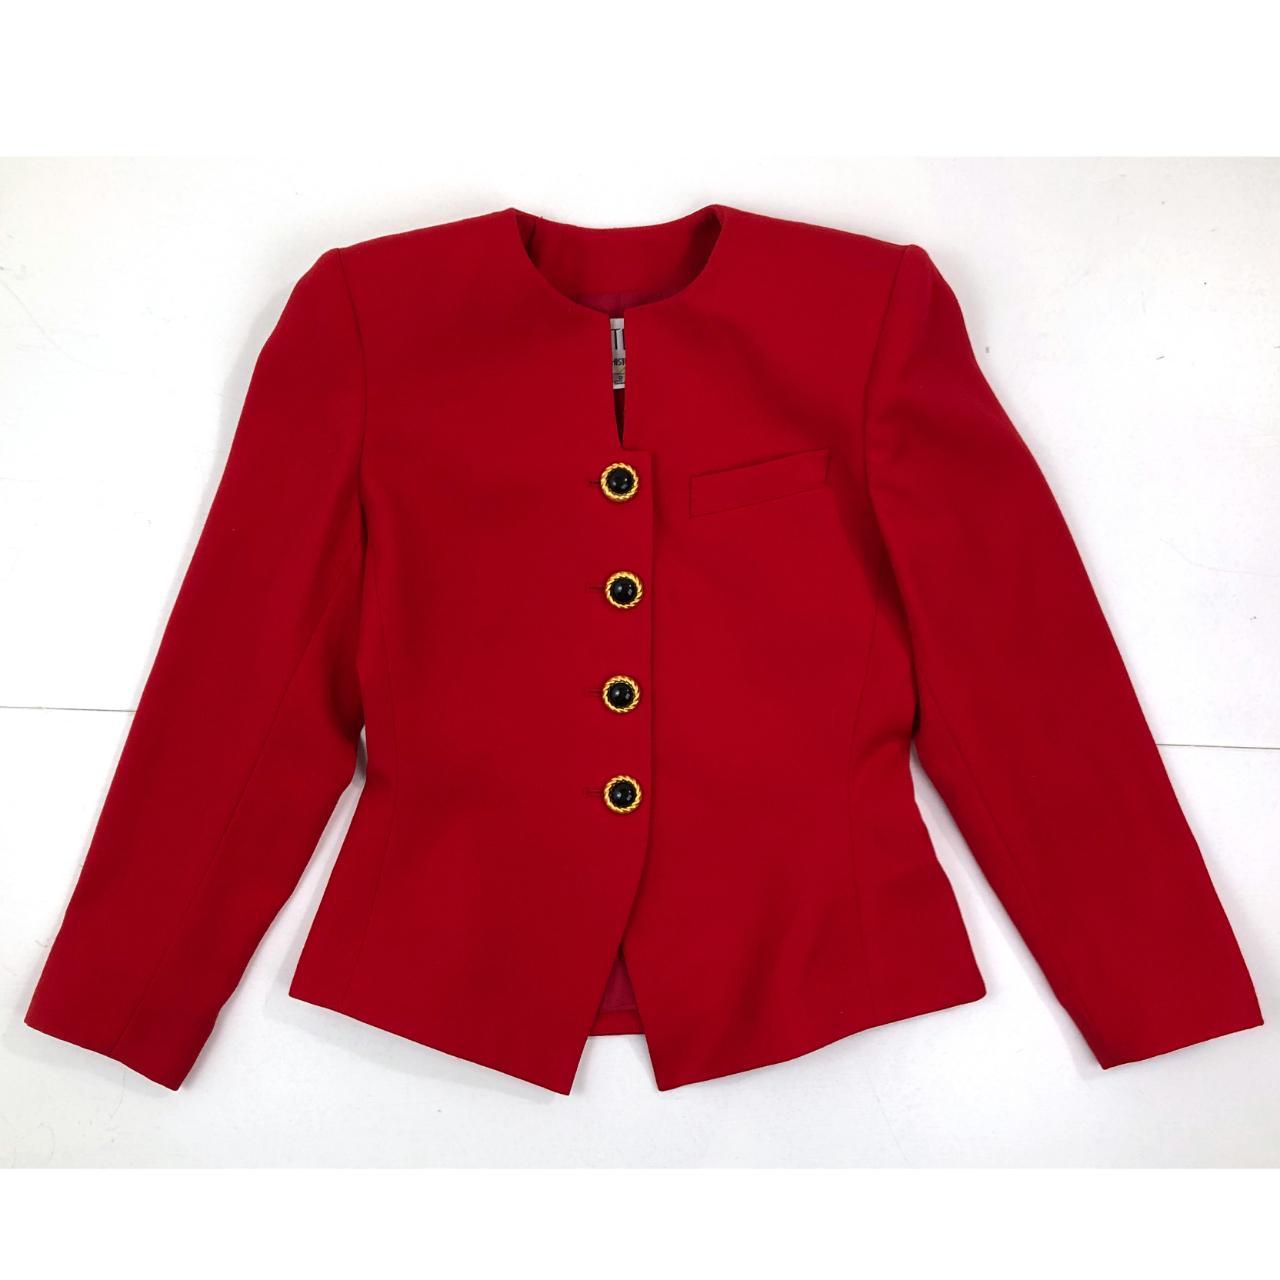 Vintage Cropped Blazer | 90s Red Military Style... - Depop